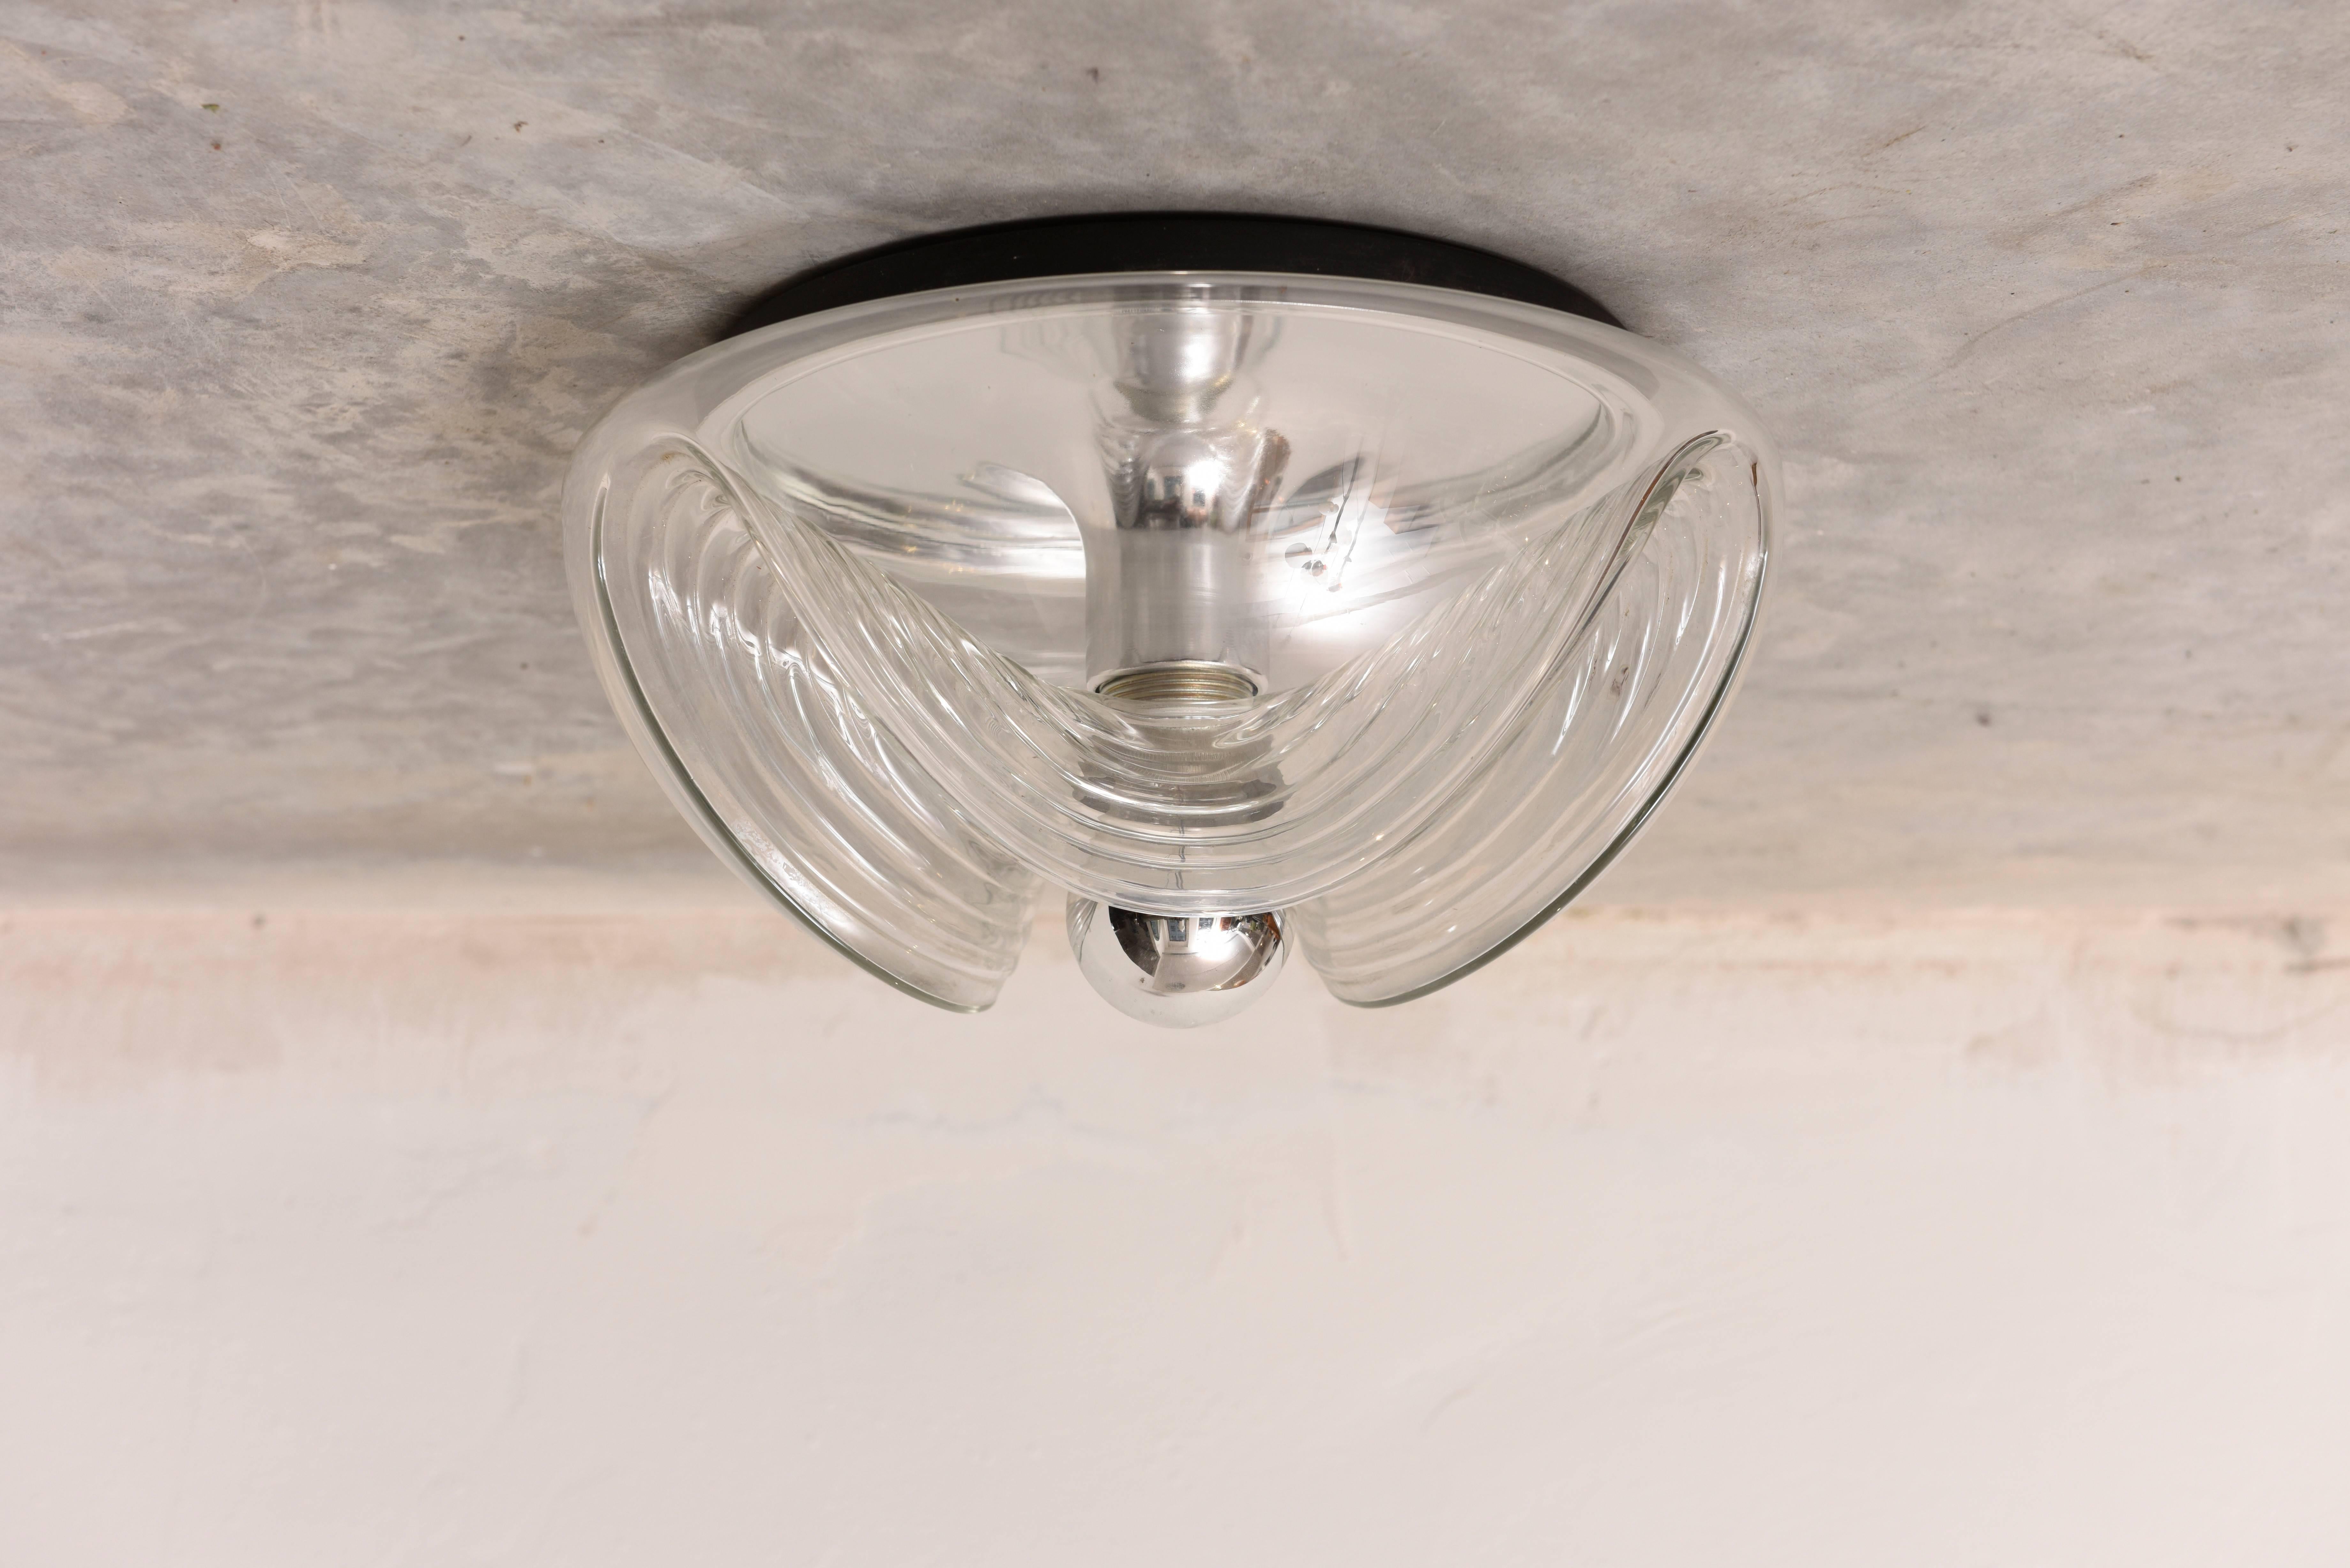 Large round wave clear glass ceiling light, flush mount designed by Peill & Putzler, Germany, 1970s.
These lamps won the IF Design award in 1975. Glashüttenwerk Peill und Sohn was founded in 1903 in Düren, a small town in Germany. Peill und Sohn